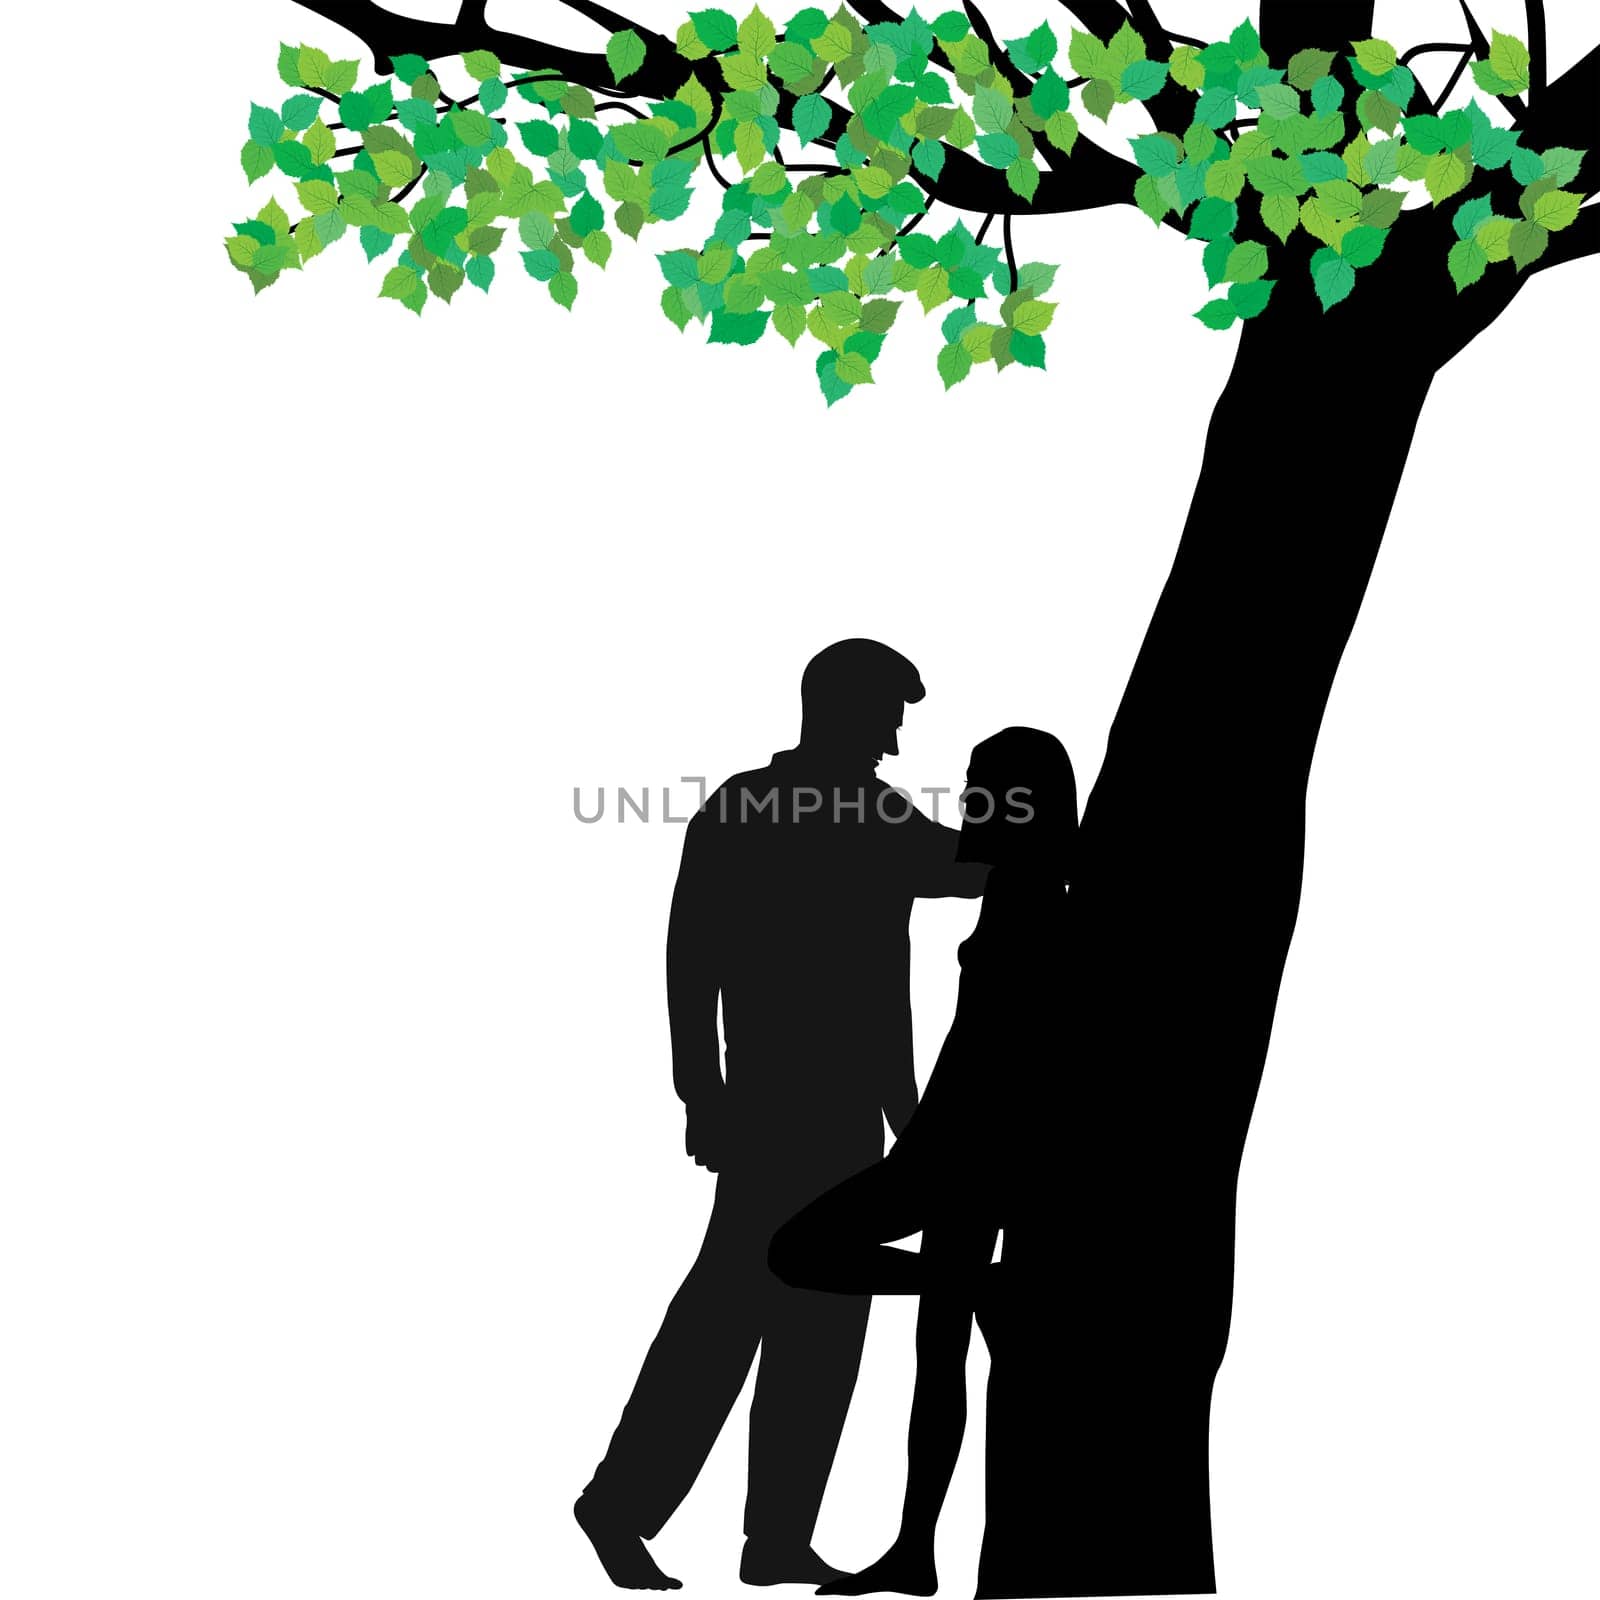 Couple lovers silhouette under a tree leaning against the tree trunk